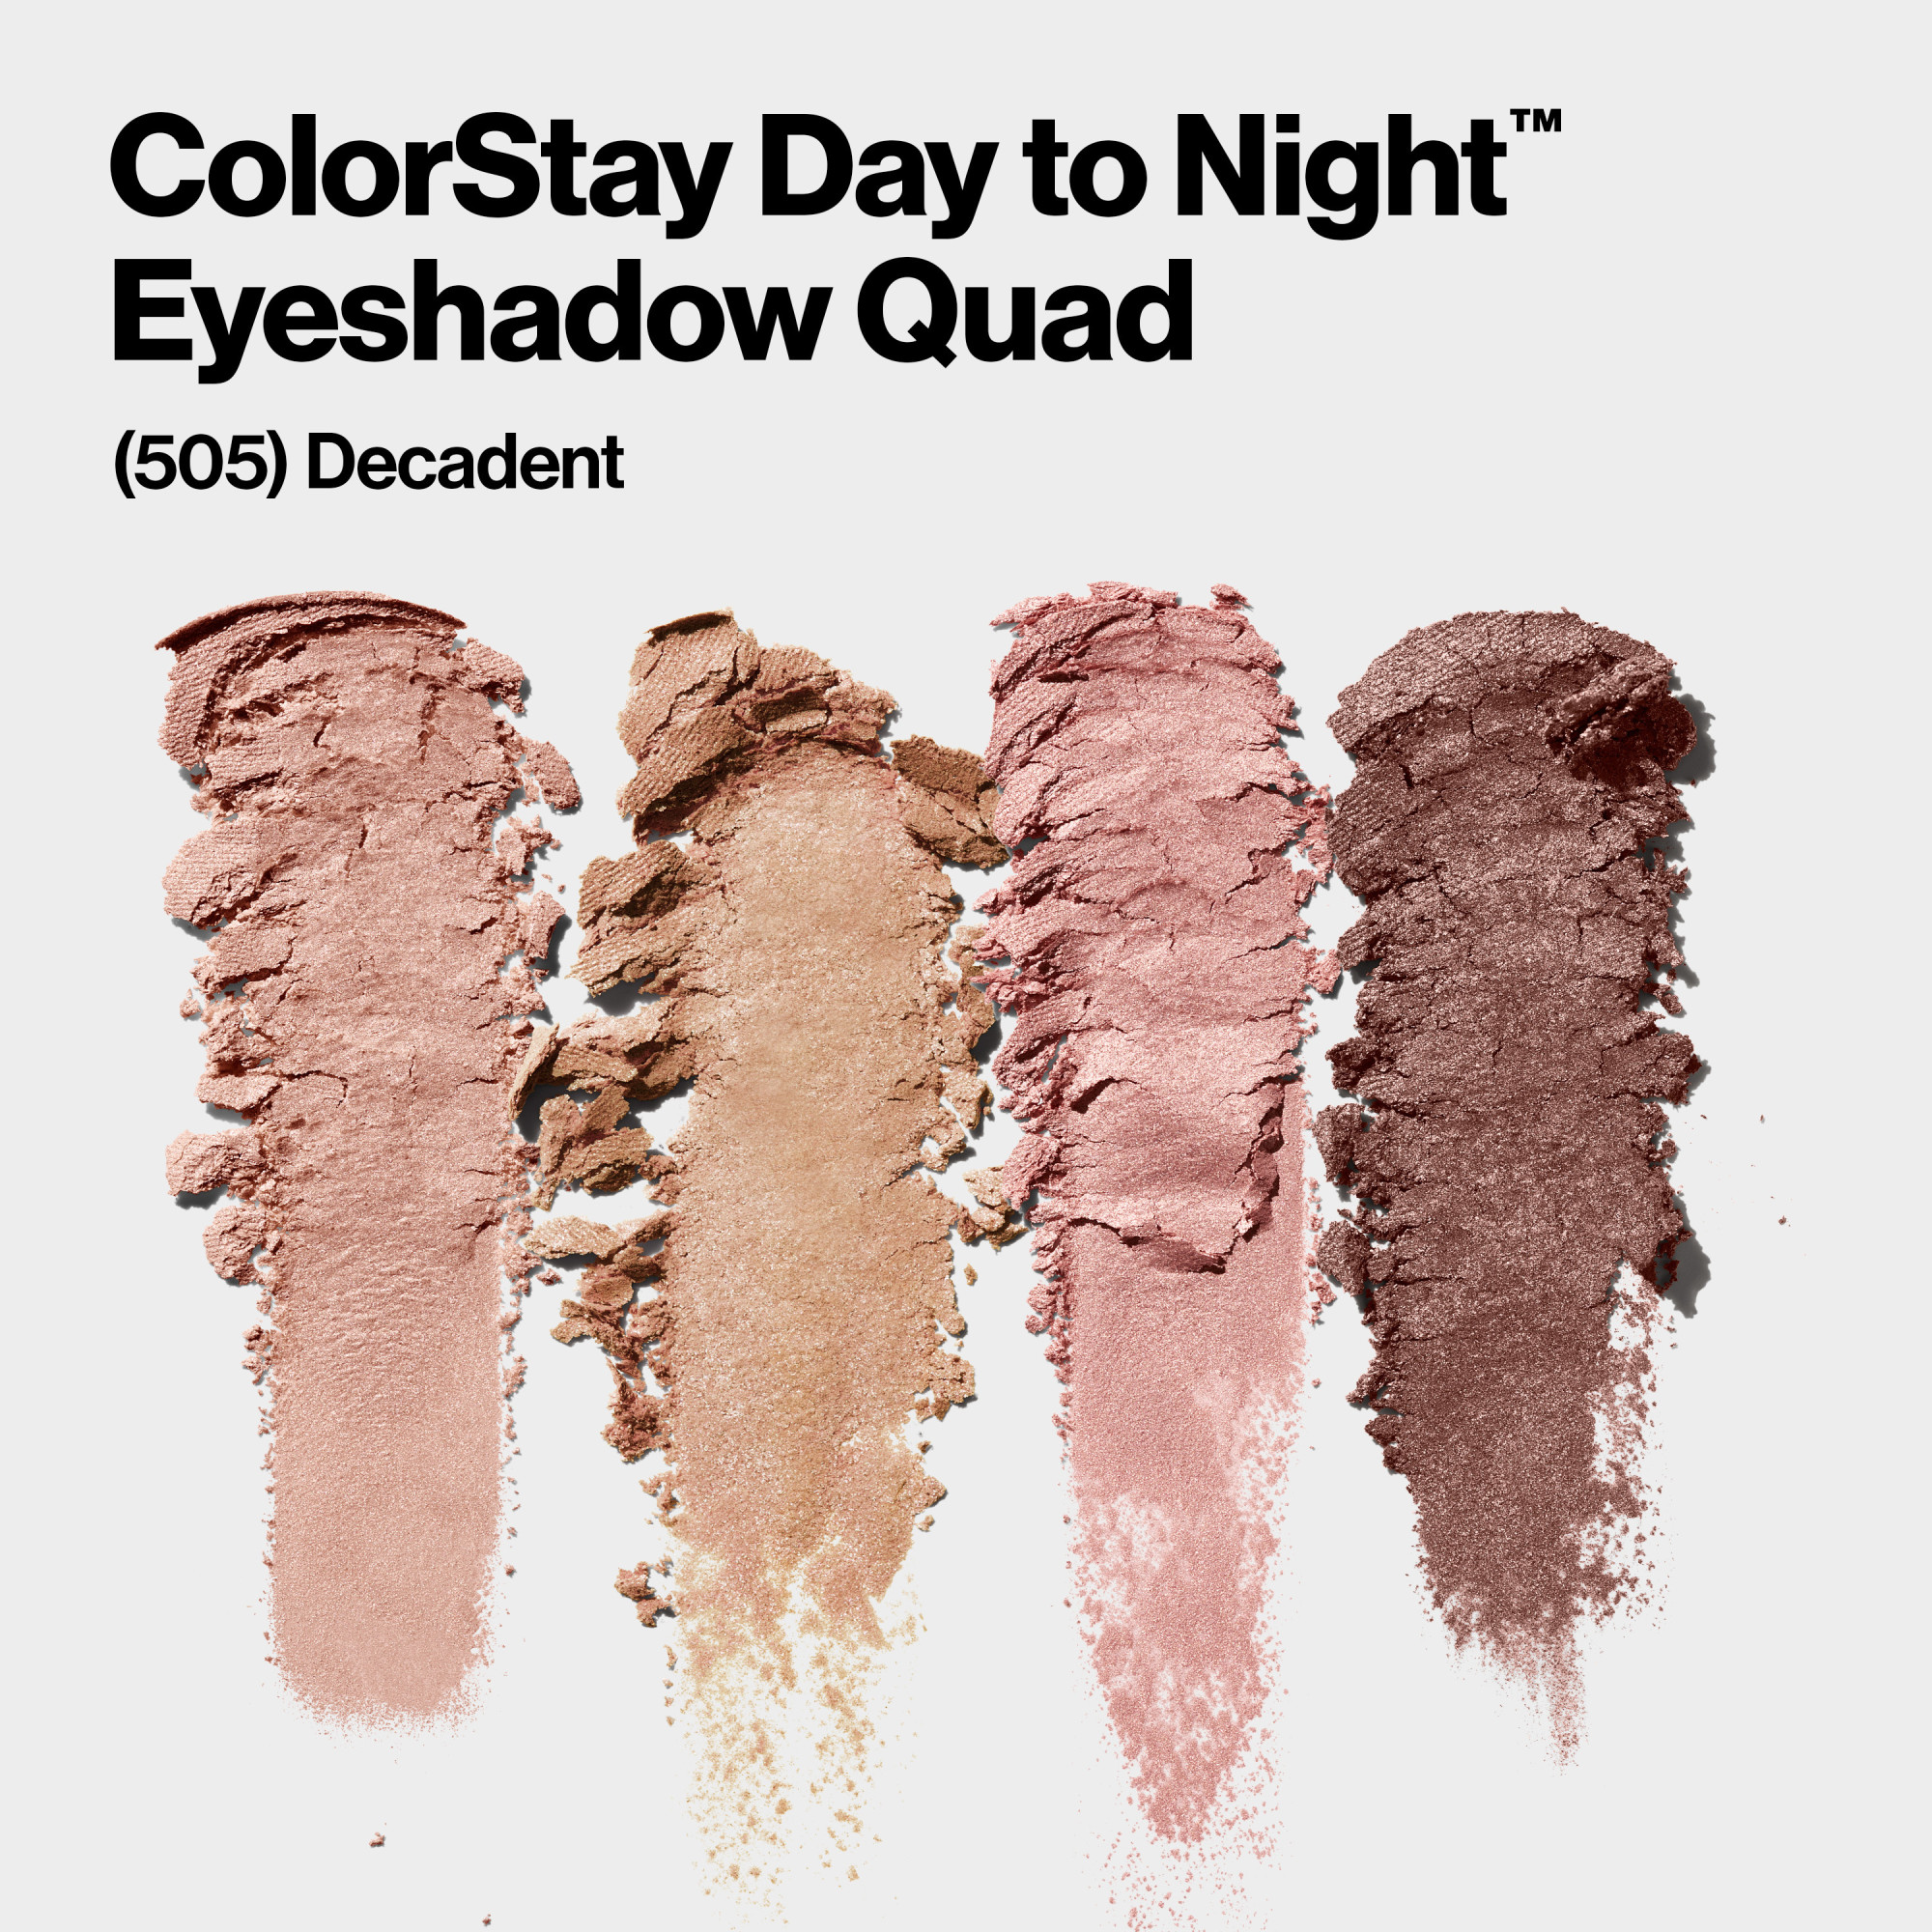 Revlon ColorStay Day to Night Eyeshadow Quad, Longwear Shadow Palette with Transitional Shades and Buttery Soft Feel, Crease & Smudge Proof, 505 Decadent, 0.16 oz - image 3 of 12